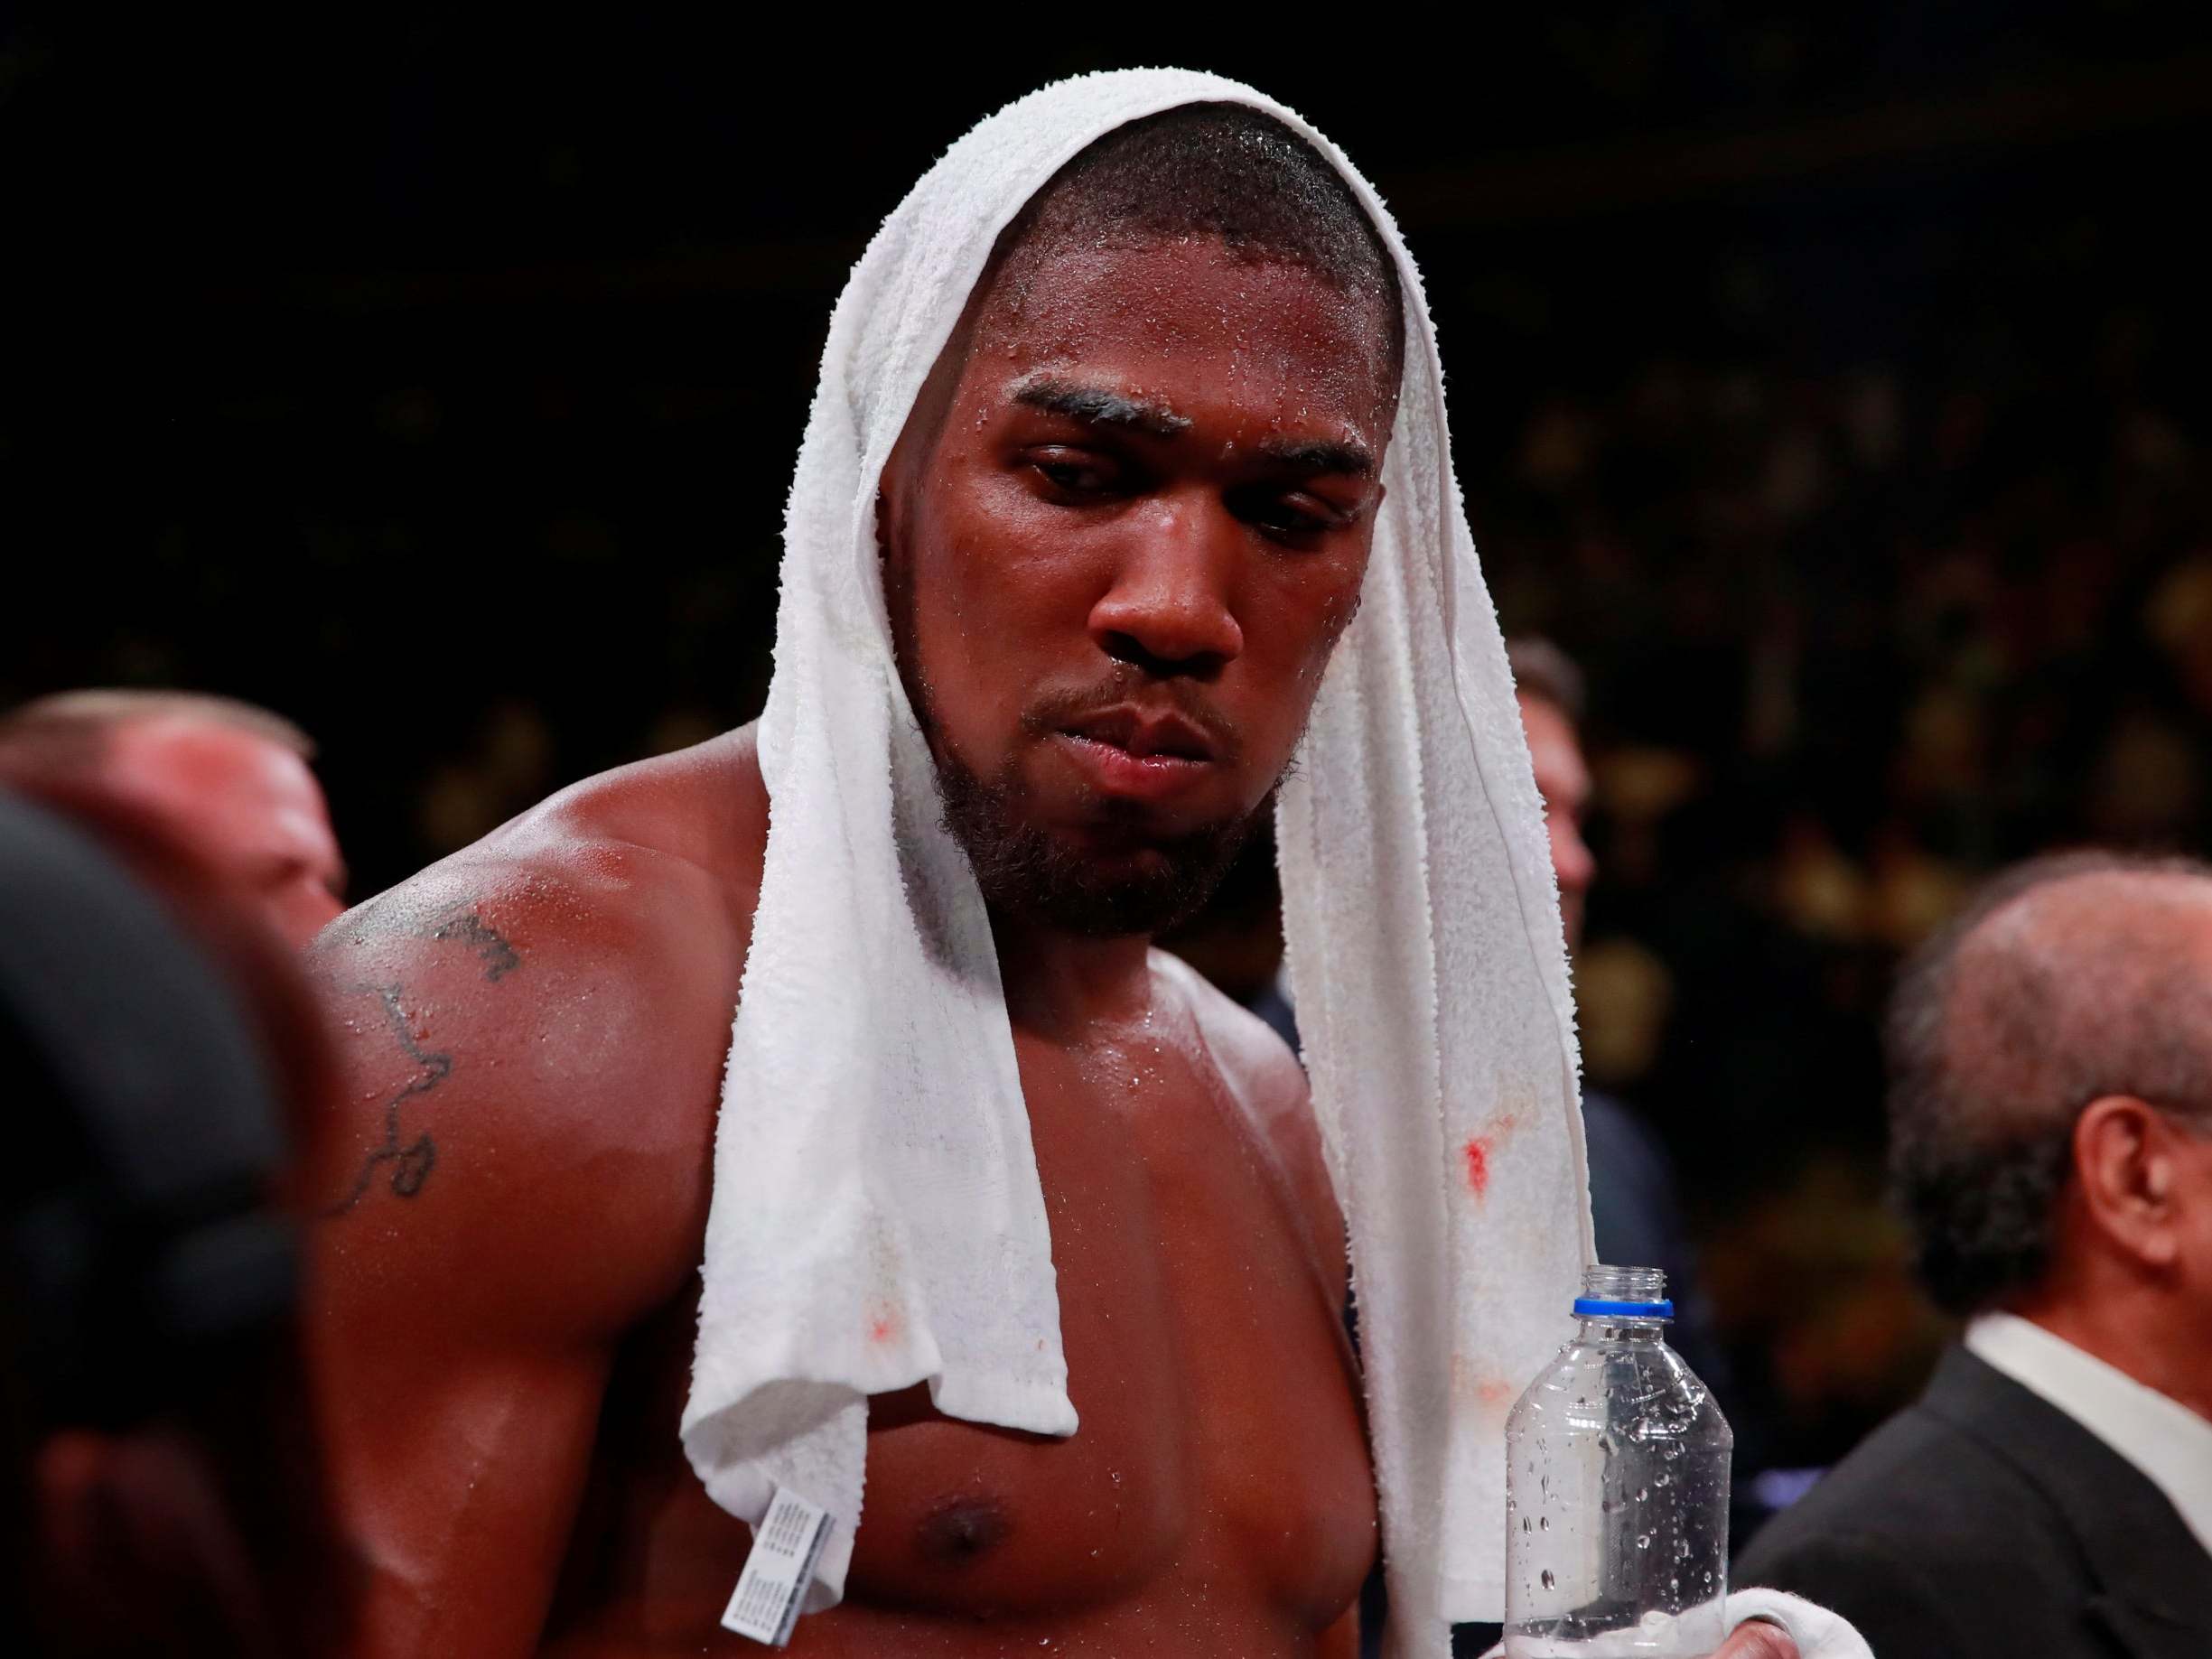 Anthony Joshua suffered defeat against Andy Ruiz Jr